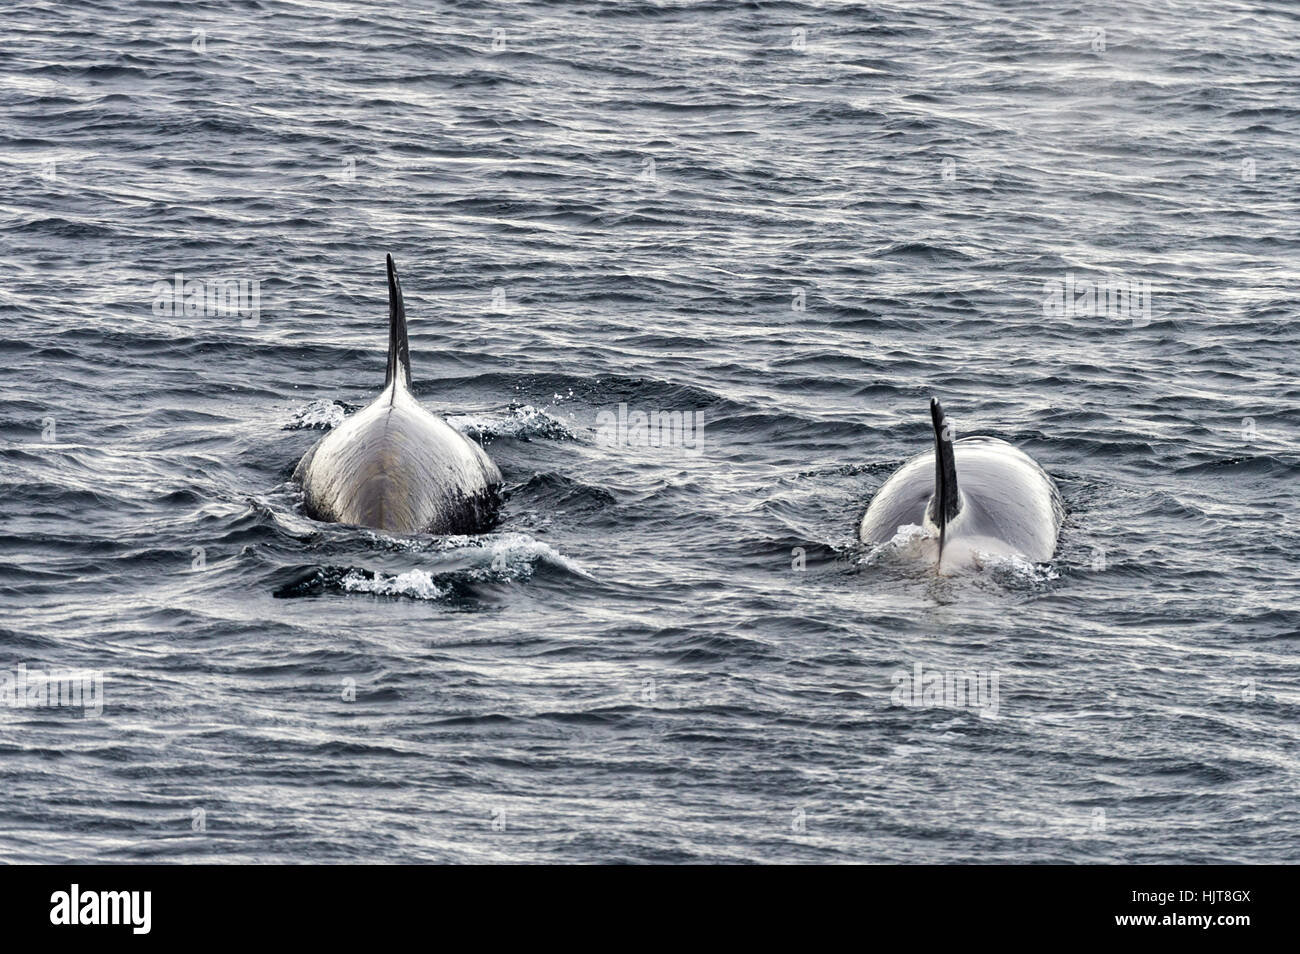 A pair of killer whales hunting along the sea ice edge in Antarctica. Stock Photo